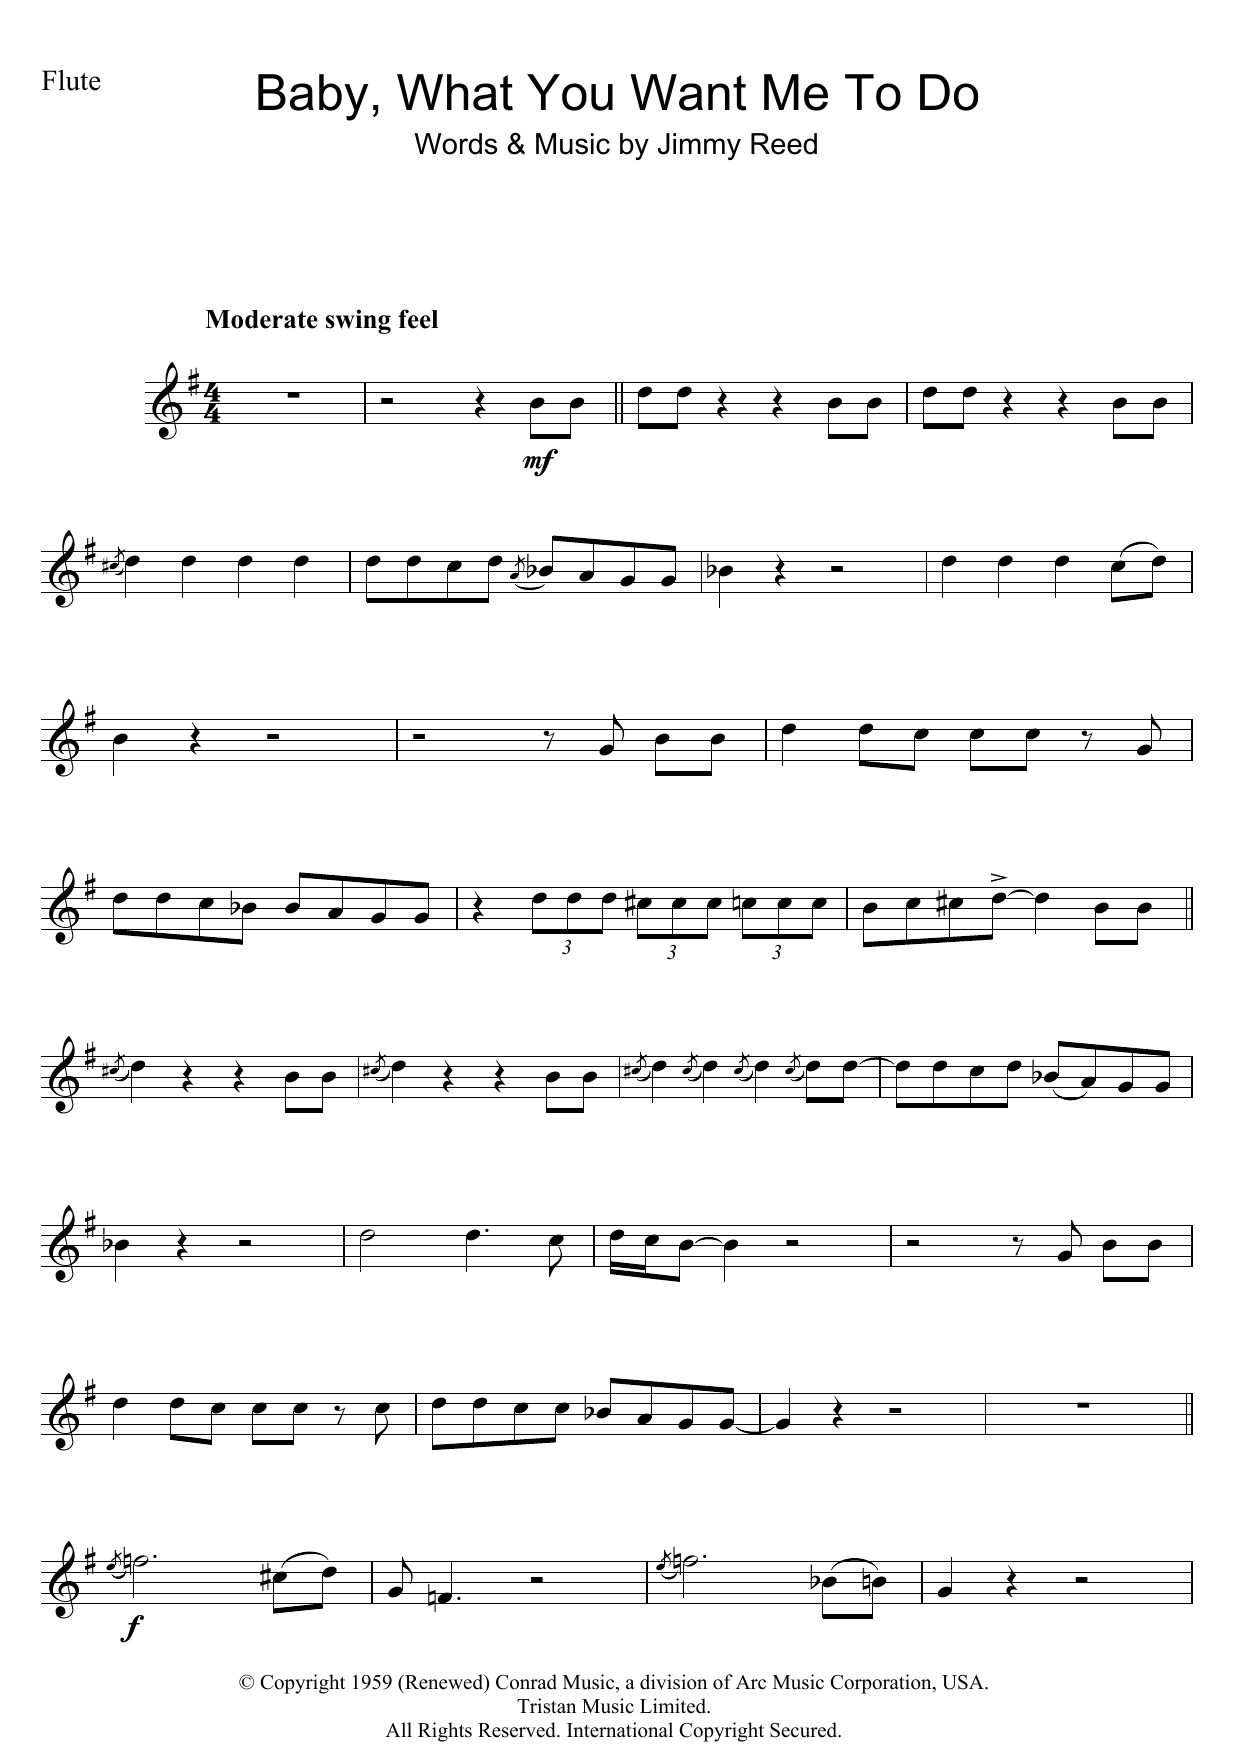 Download Etta James Baby, What You Want Me To Do Sheet Music